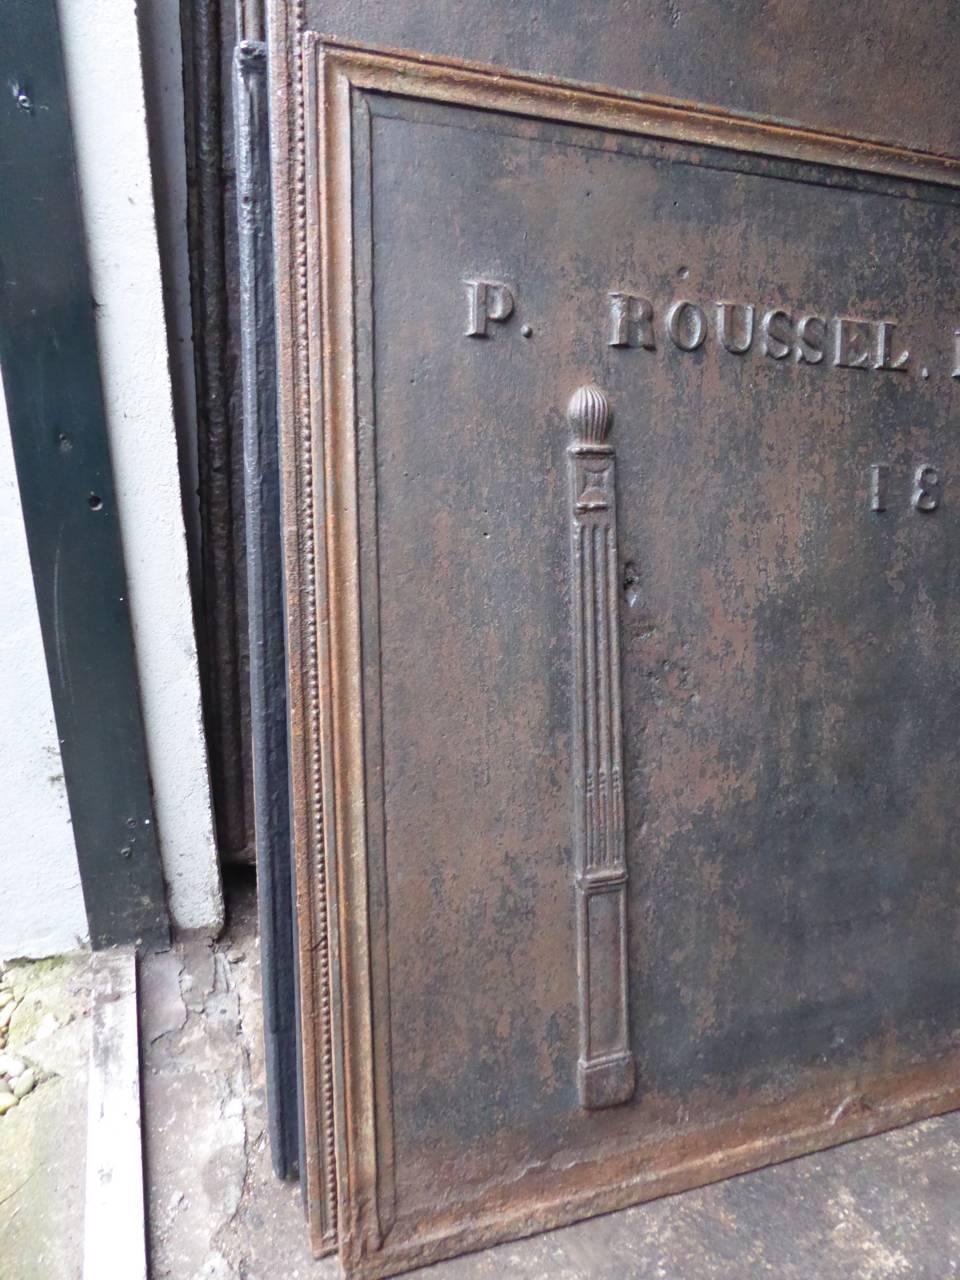 French fireback with the pillars of freedom, a name and the date of production 1851.

This product weighs more than 65 kg / 143 lbs. All our products that weigh 66 kg / 146 lbs or more are shipped as standard door-to-door freight. You can contact us